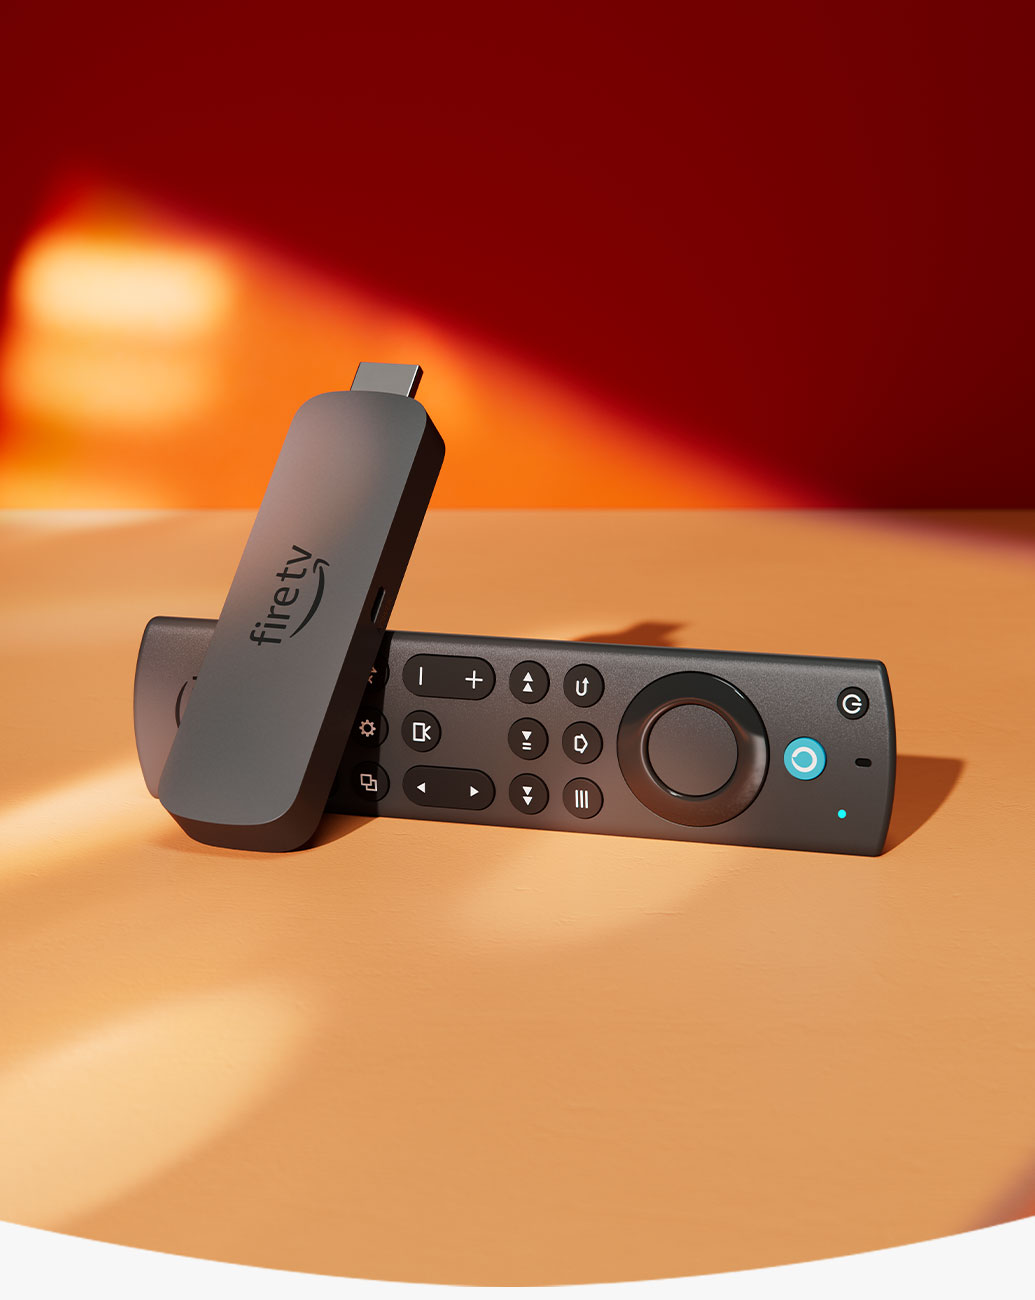 Firestick remote and TV with strong signal bars